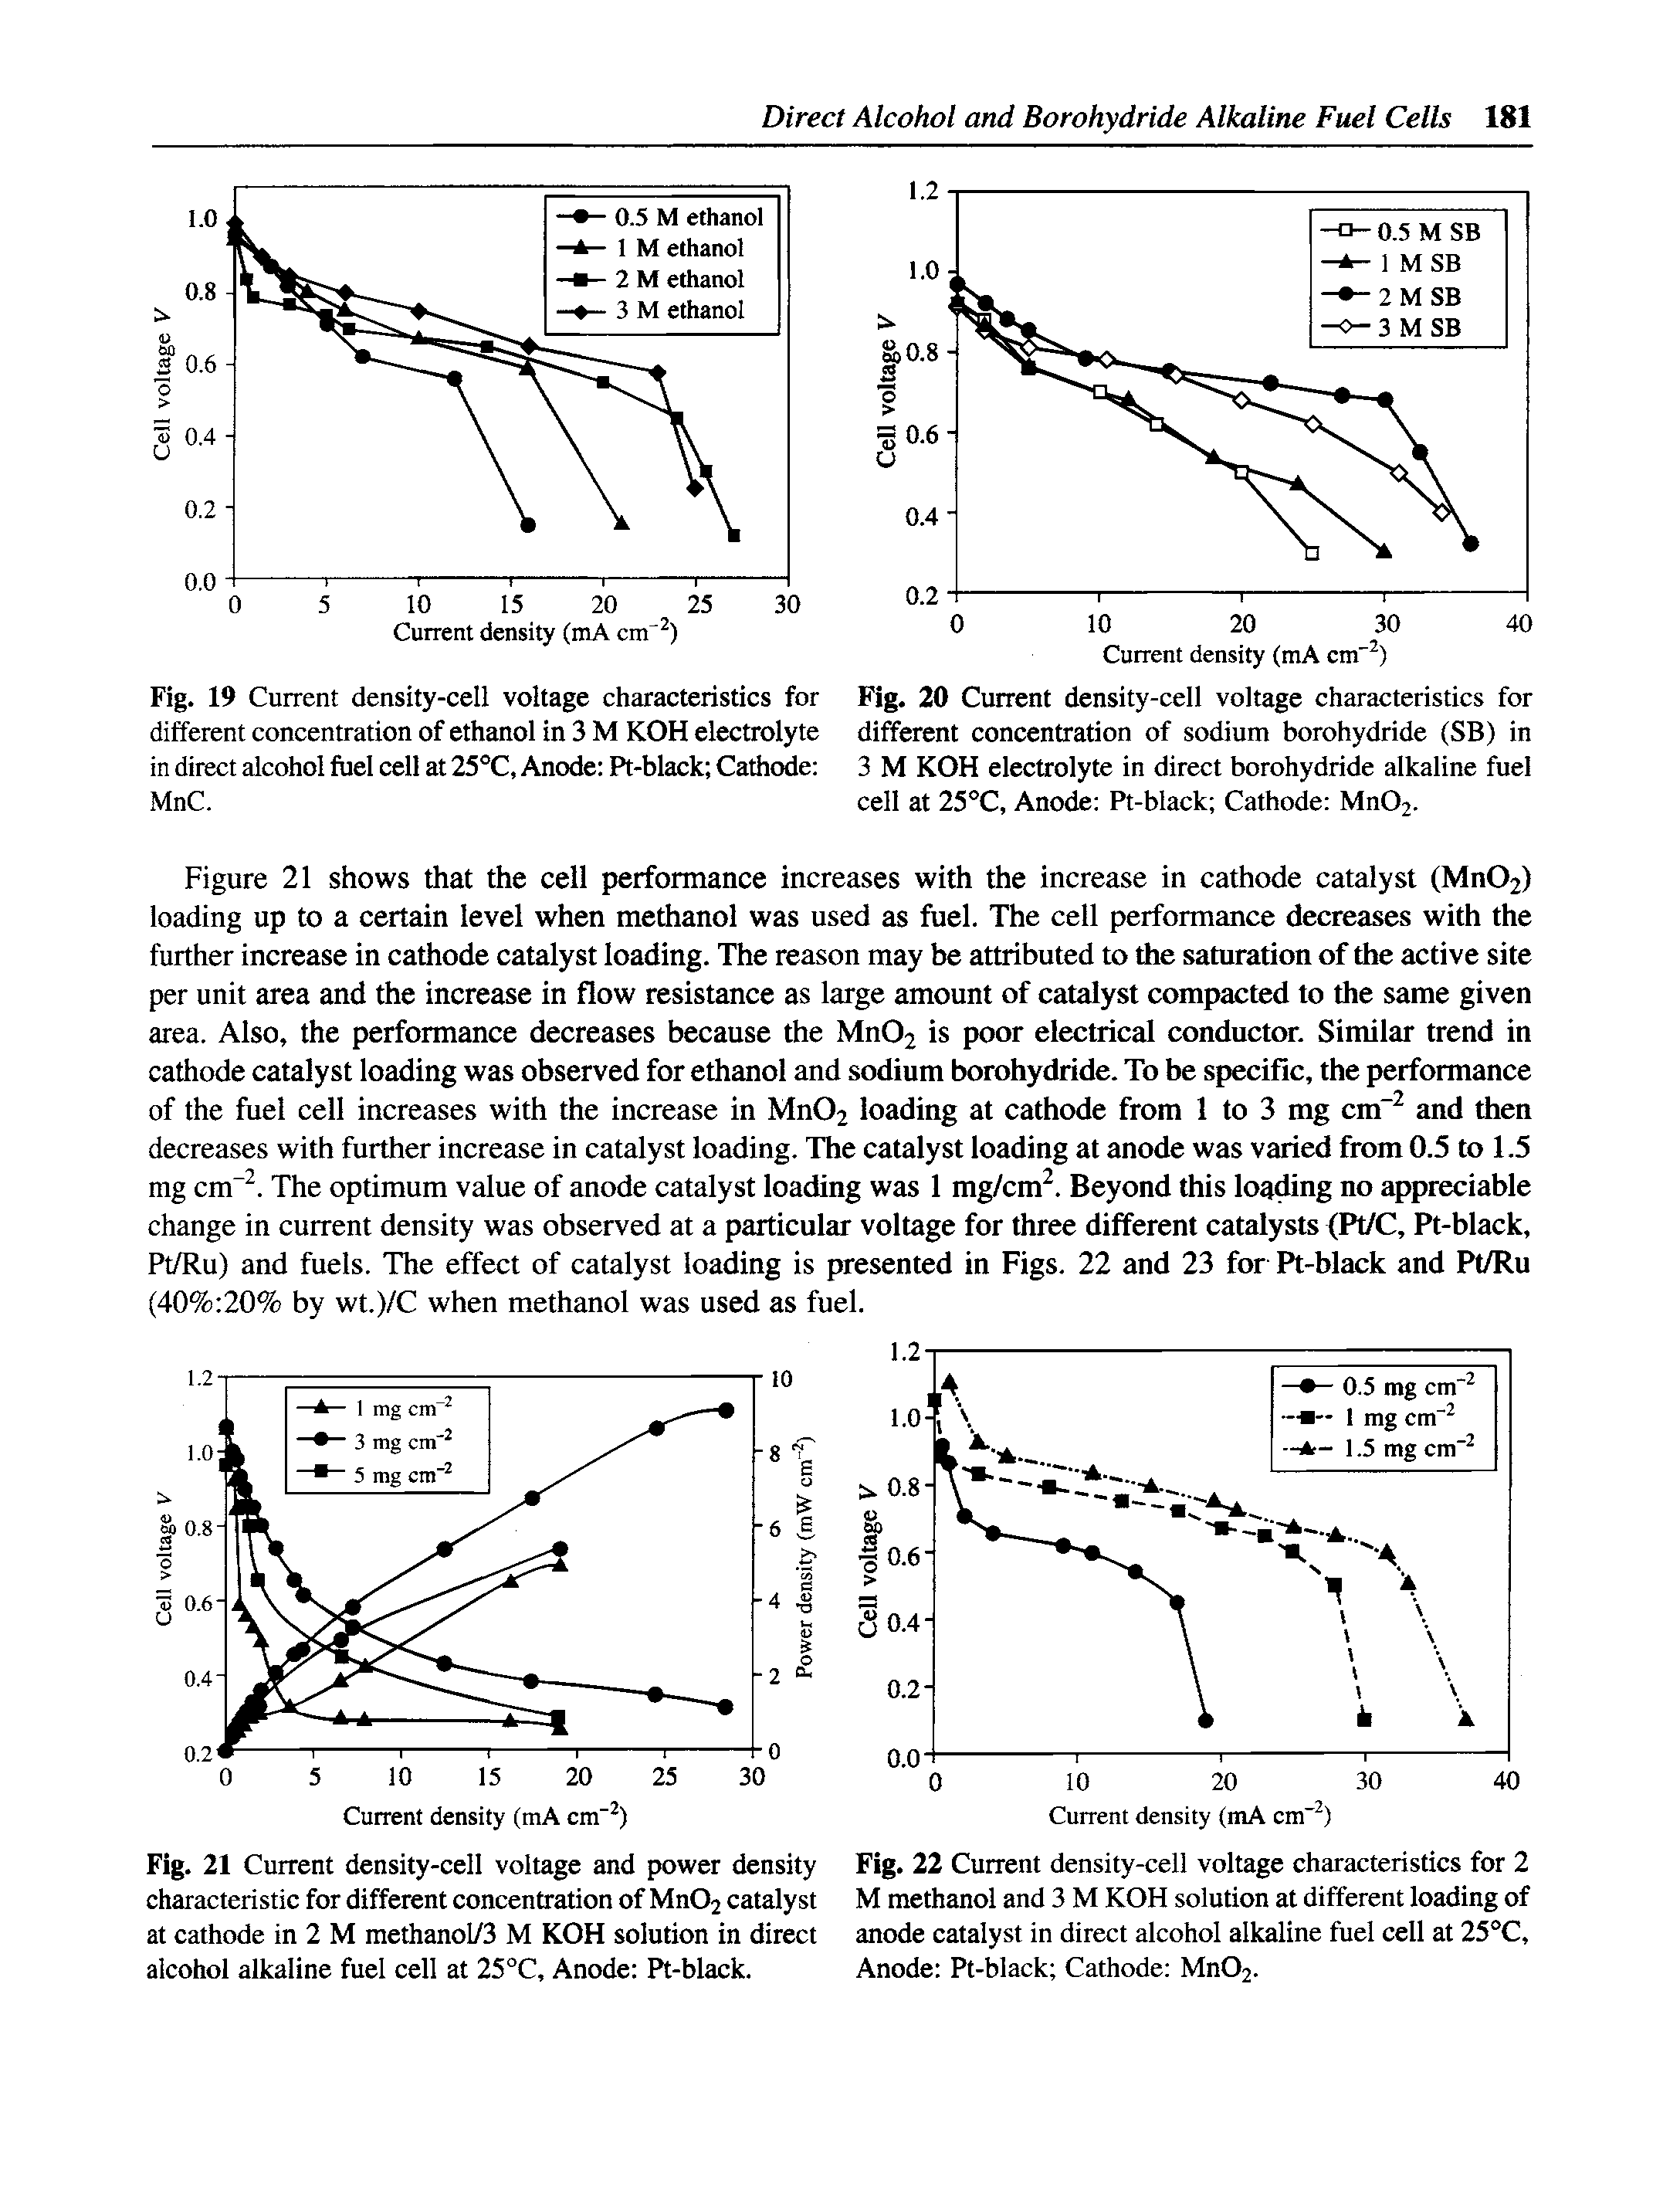 Fig. 21 Current density-cell voltage and power density characteristic for different concentration of Mn02 catalyst at cathode in 2 M methanol/3 M KOH solution in direct alcohol alkaline fuel cell at 25°C, Anode Pt-black.